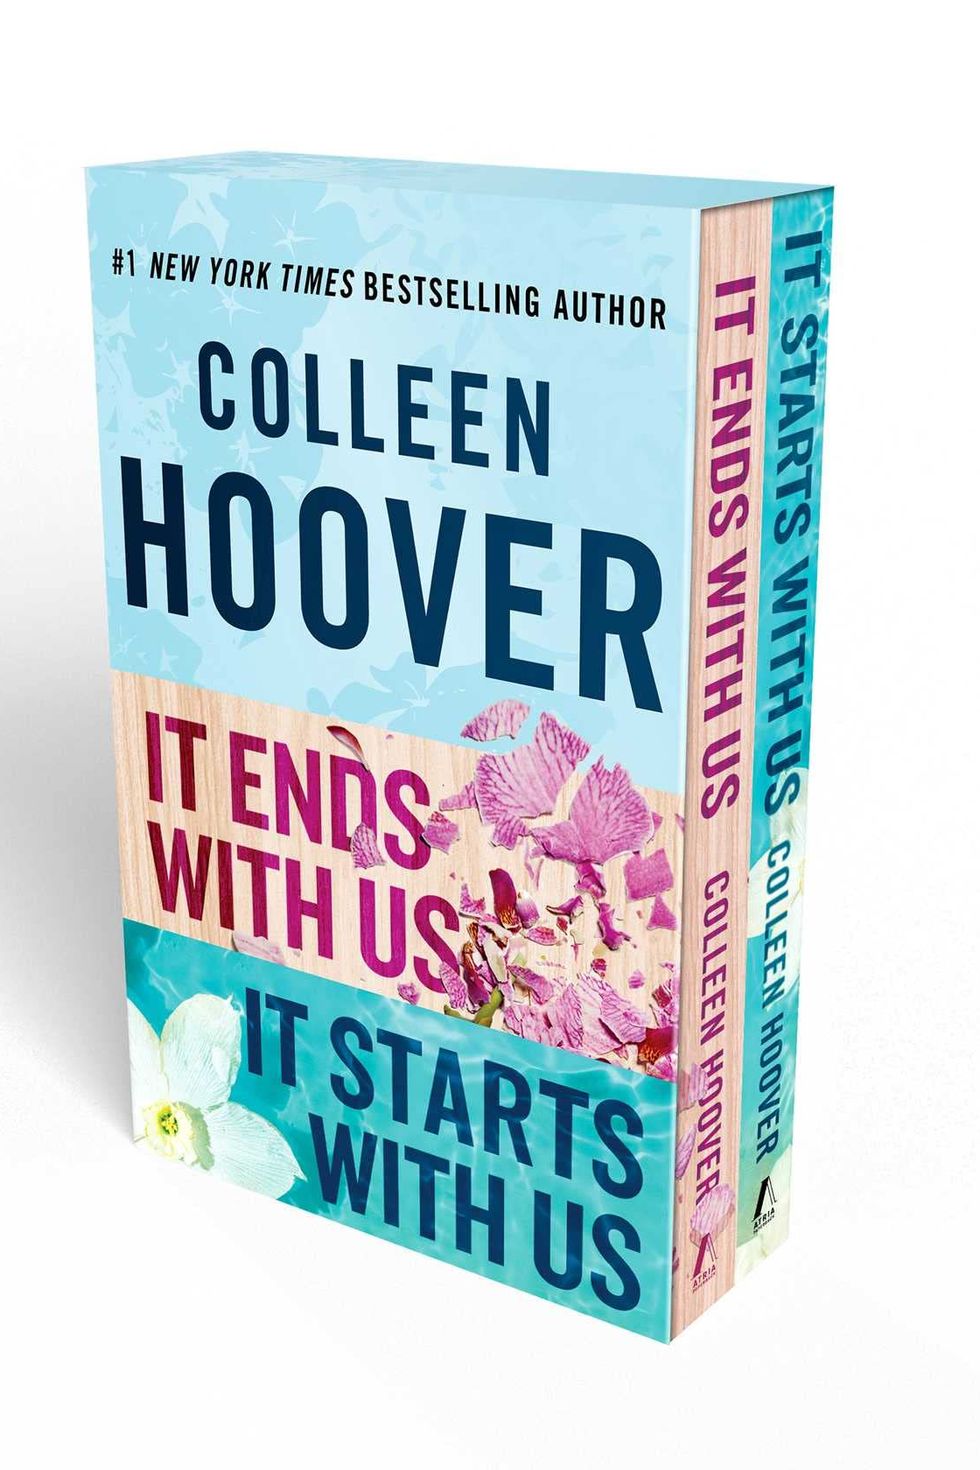 Colleen hoover 13 best book collection english paperback brand new books